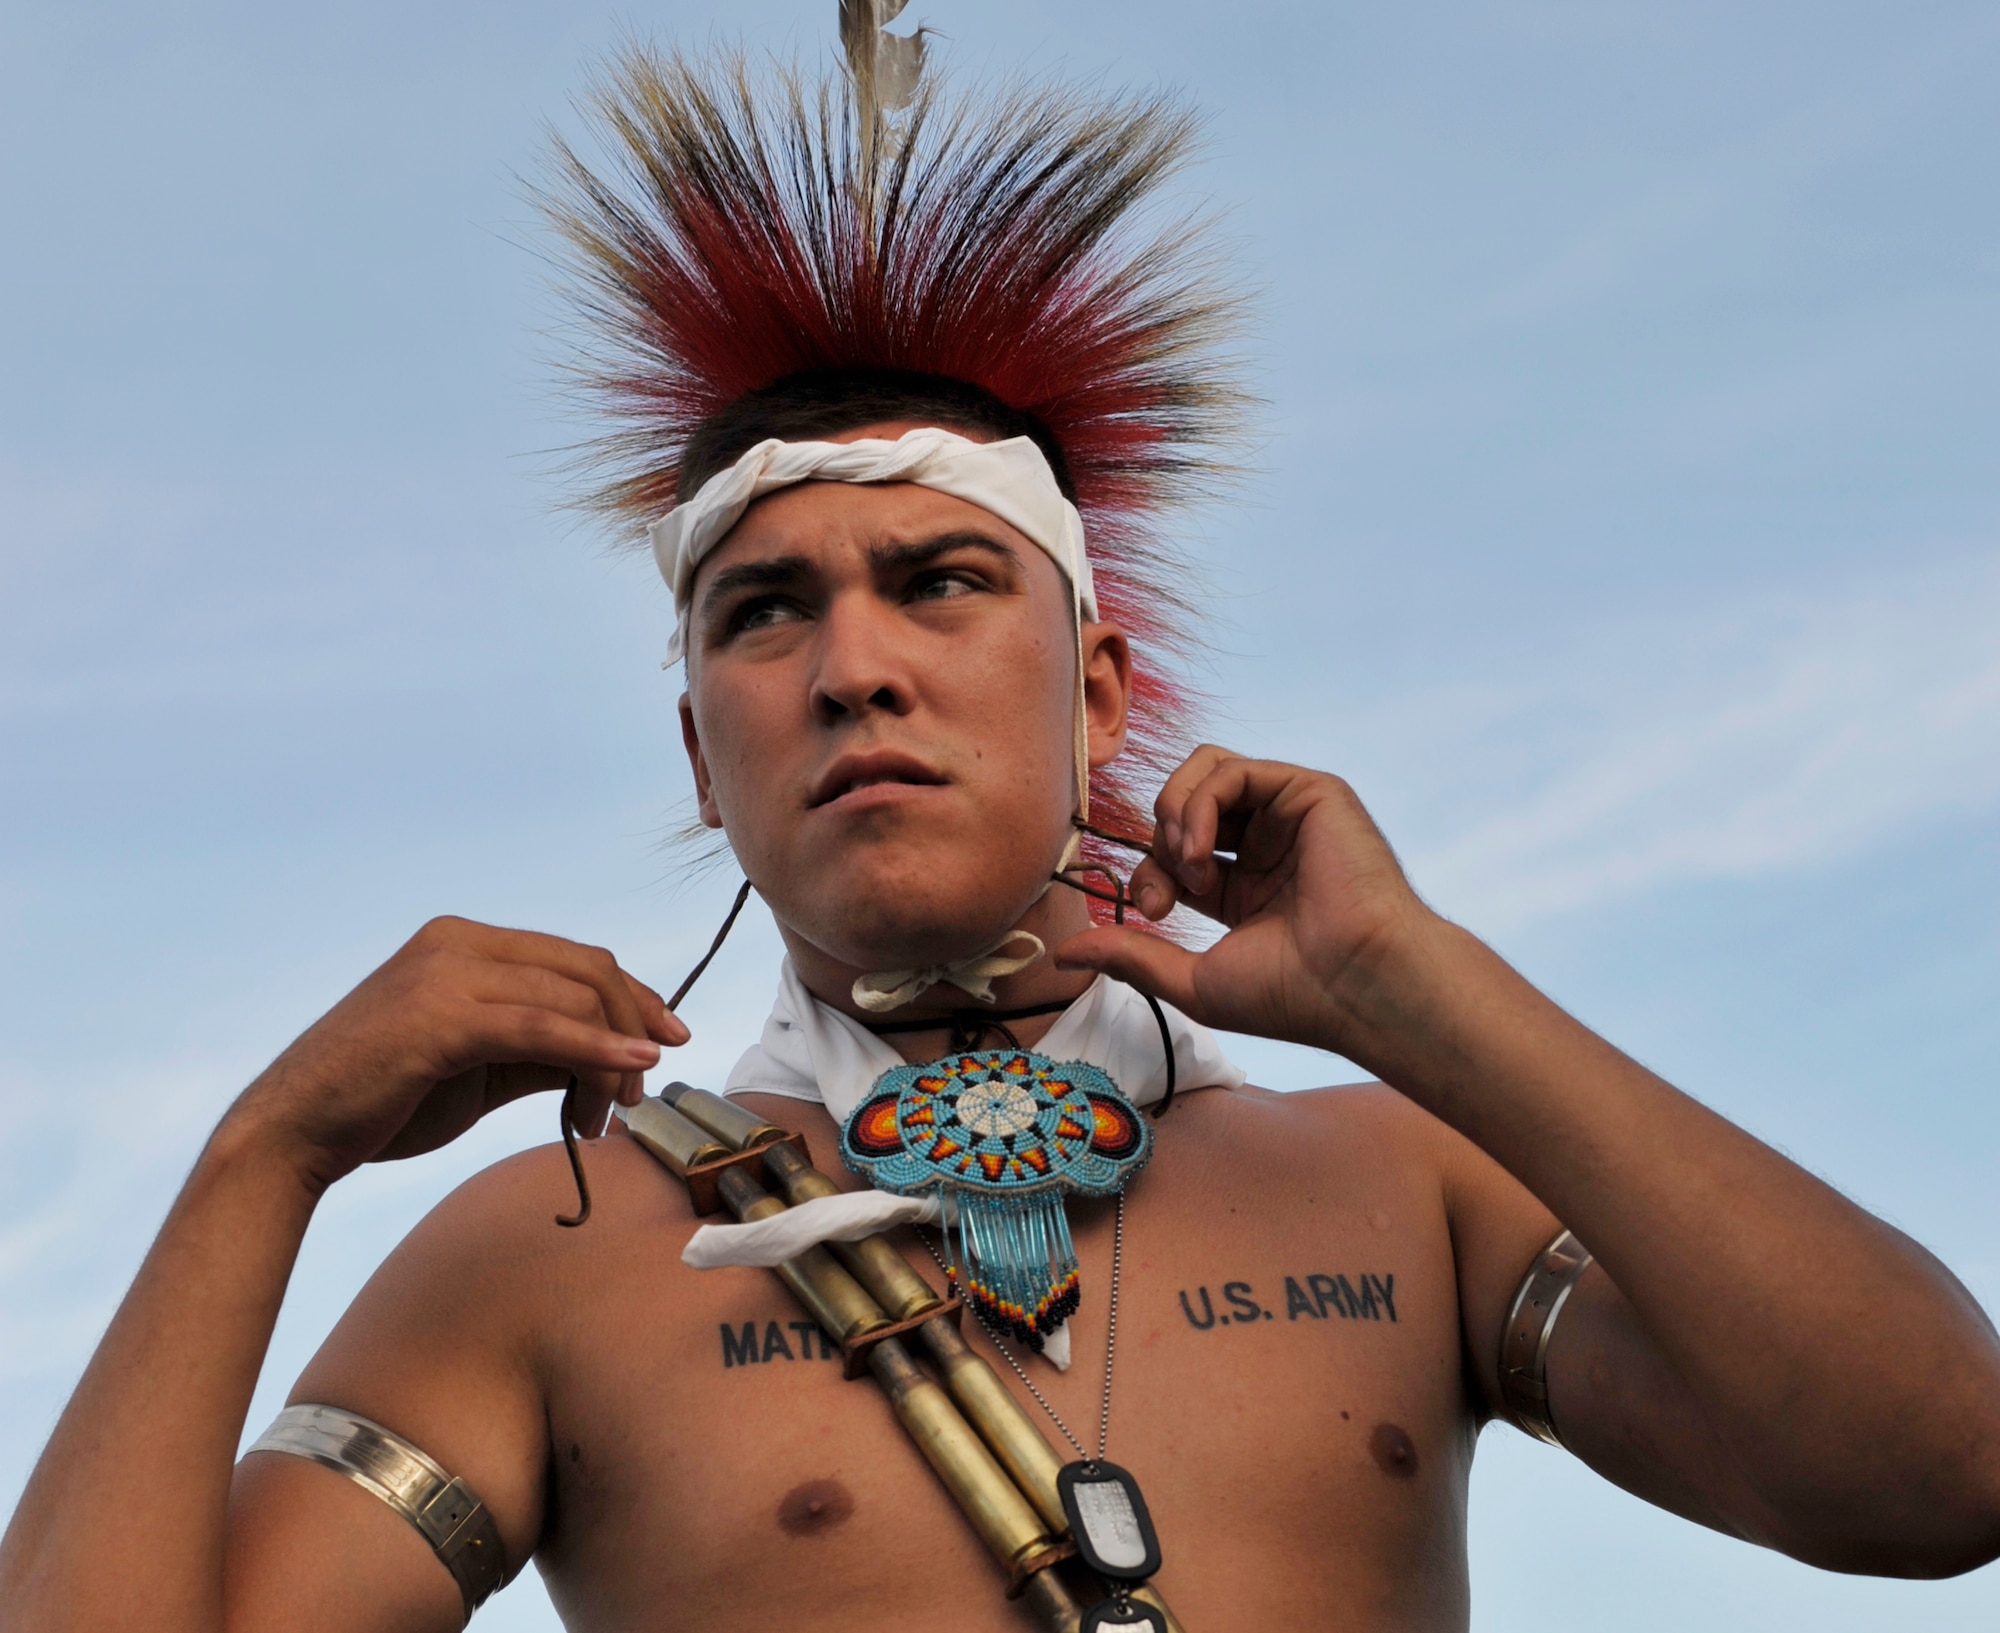 U.S. Army Pvt. Skyler Mathews ties a Kanza roach, or headdress, to his head while preparing to dance during his tribe's annual pow wow near Kaw City, Okla., on Aug. 2, 2009. Pvt. Mathews is an infantryman in the Army National Guard and member of the Kaw Nation, a sovereign Native American tribe headquarted in Kaw City. Like its home state of Kansas, the 931st Air Refueling Group draws its identity from the proud Kanza people of the Kaw Nation. The tribe's roach has become a symbol of the 931st ARG and "Kanza" is the official call sign assigned to 931st flying missions. (U.S. Air Force photo/Tech. Sgt. Jason Schaap) 